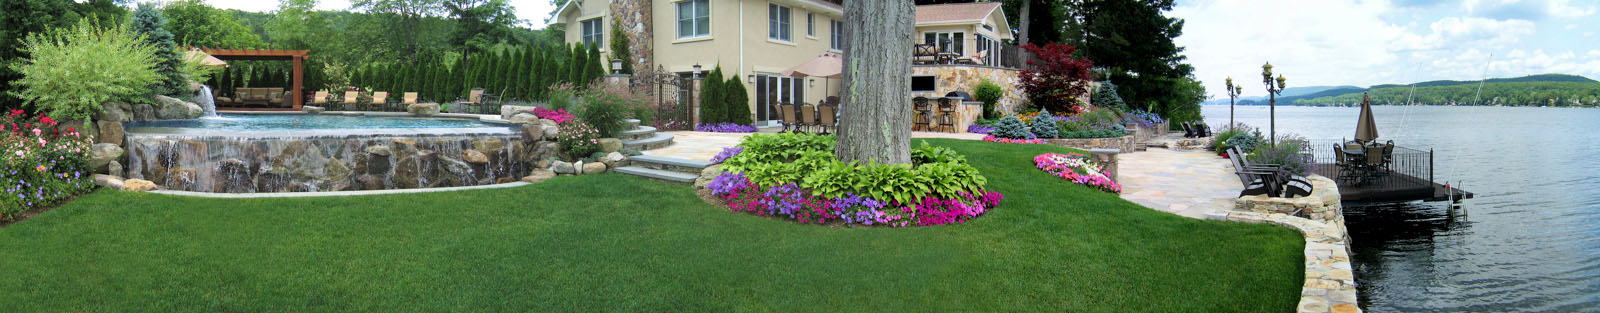 infinity pool and pool landscaping - nj